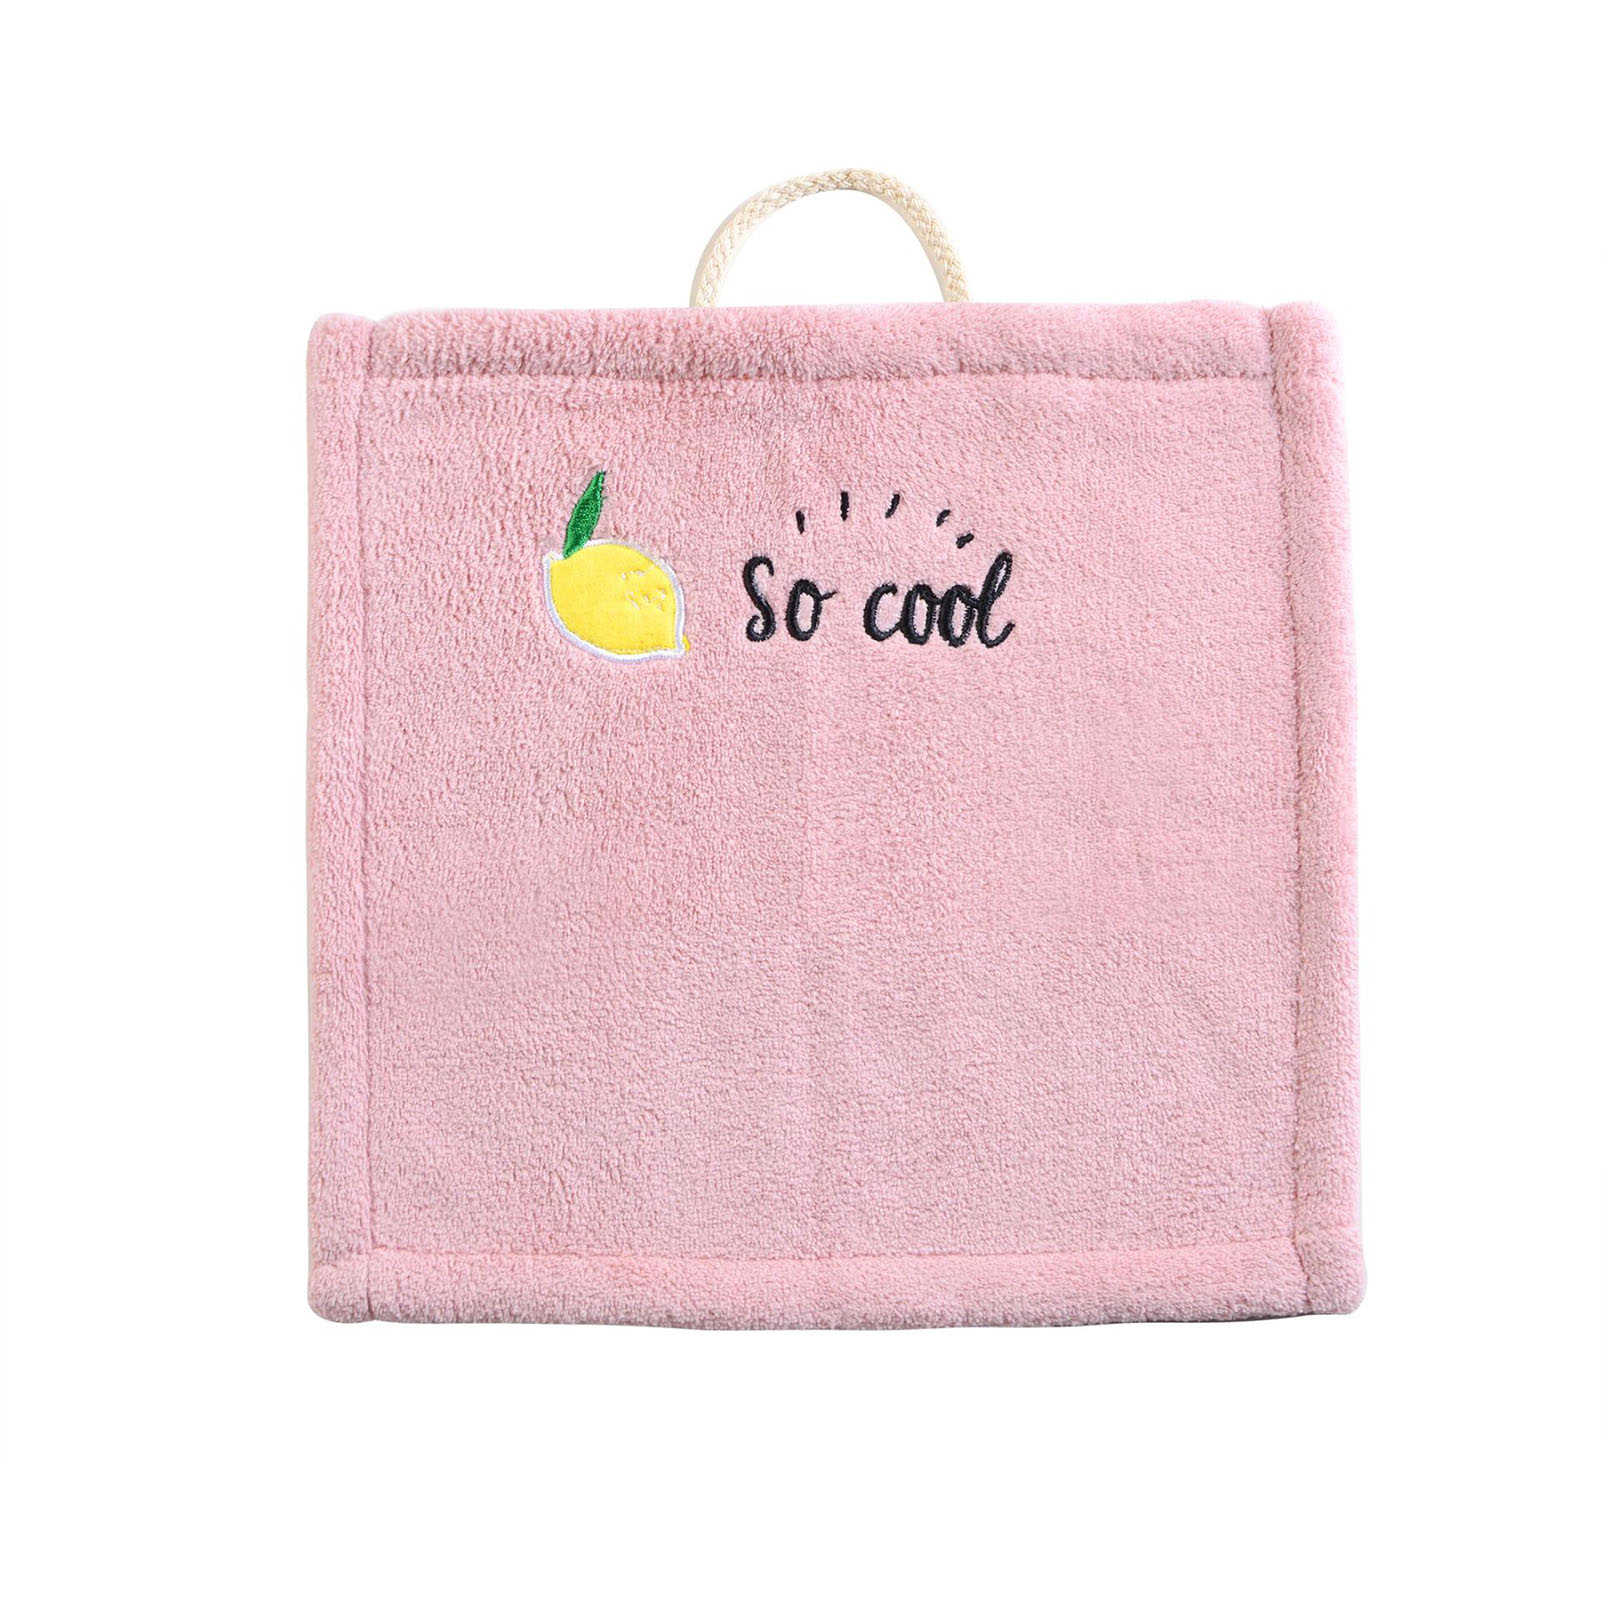 SPRING PARK Bathroom Hand Towels , Cotton Face Towels , Soft Absorbent Hand Towel for Home - image 5 of 7